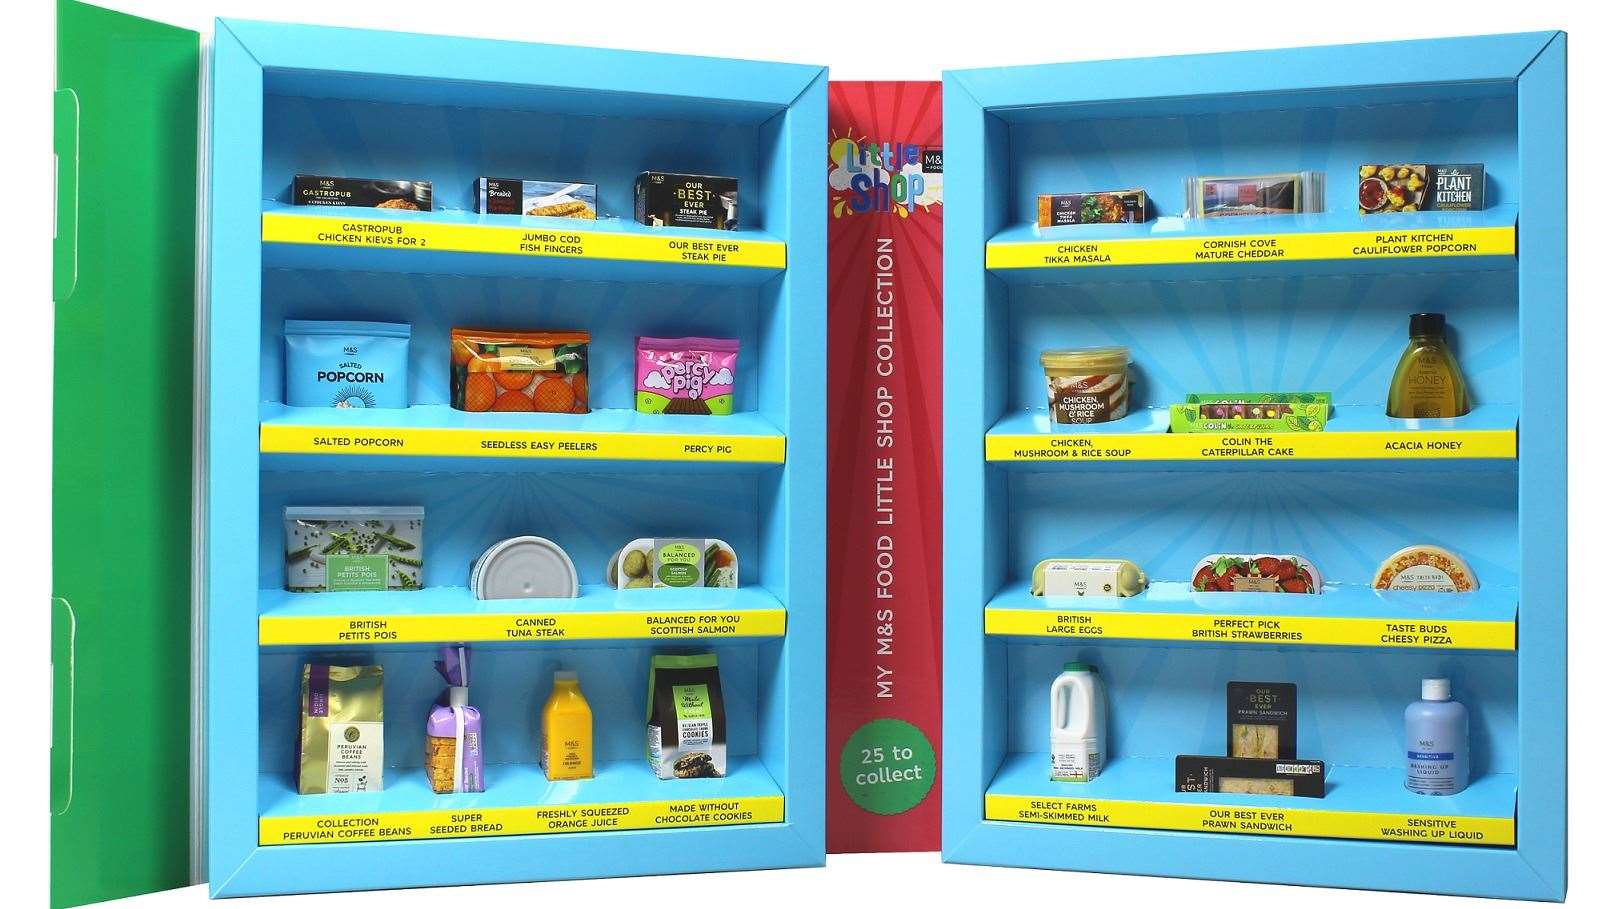 There are 25 popular M&S products turned into miniature collectables